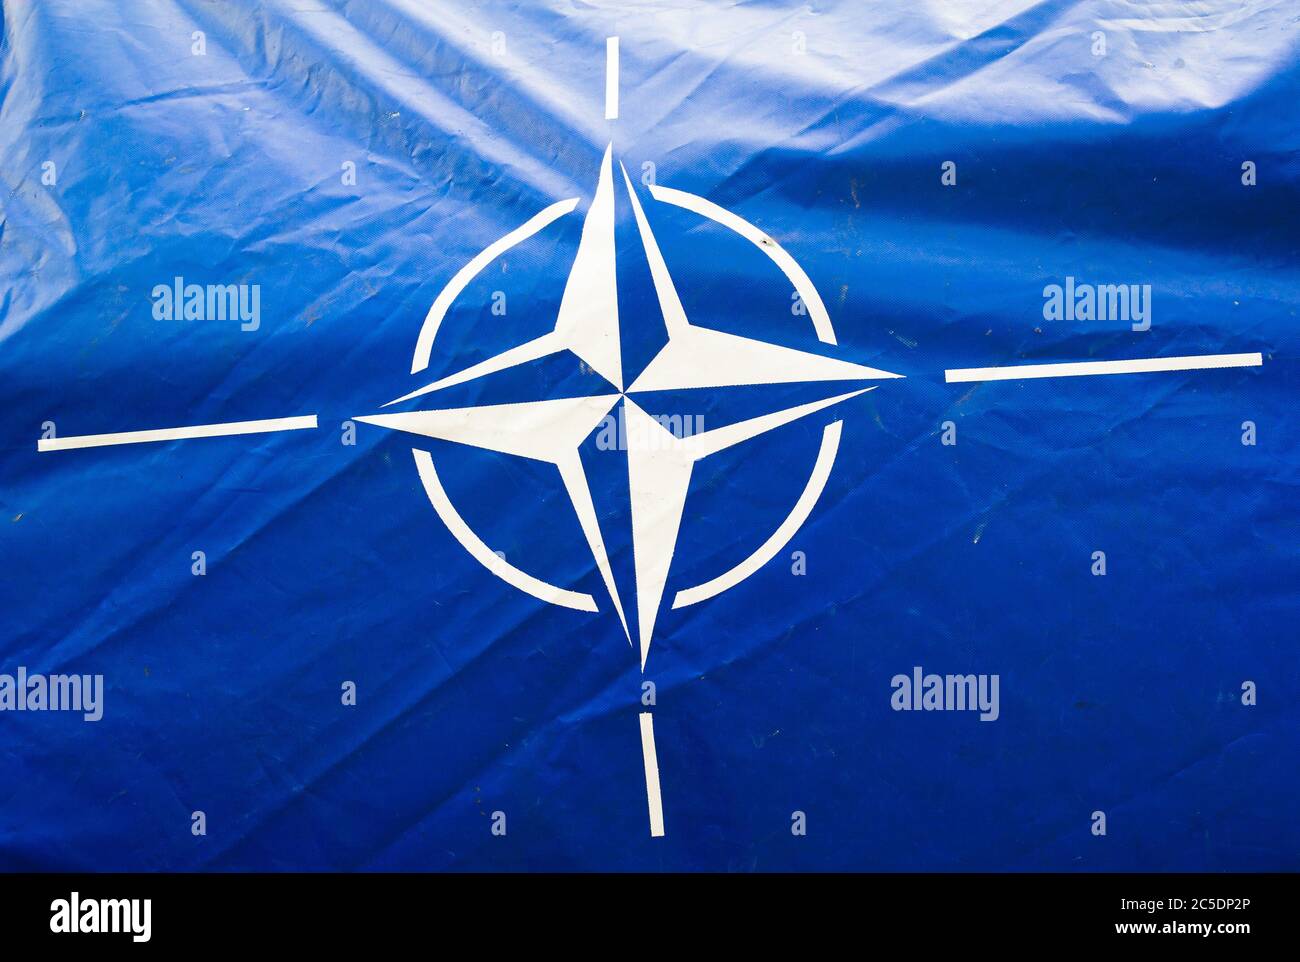 Ostrava, Czechia - September 18, 2016: Dirty and wrinkled blue canvas with flag of NATO ( North Atlantic Treaty Organization ). Military alliance Stock Photo